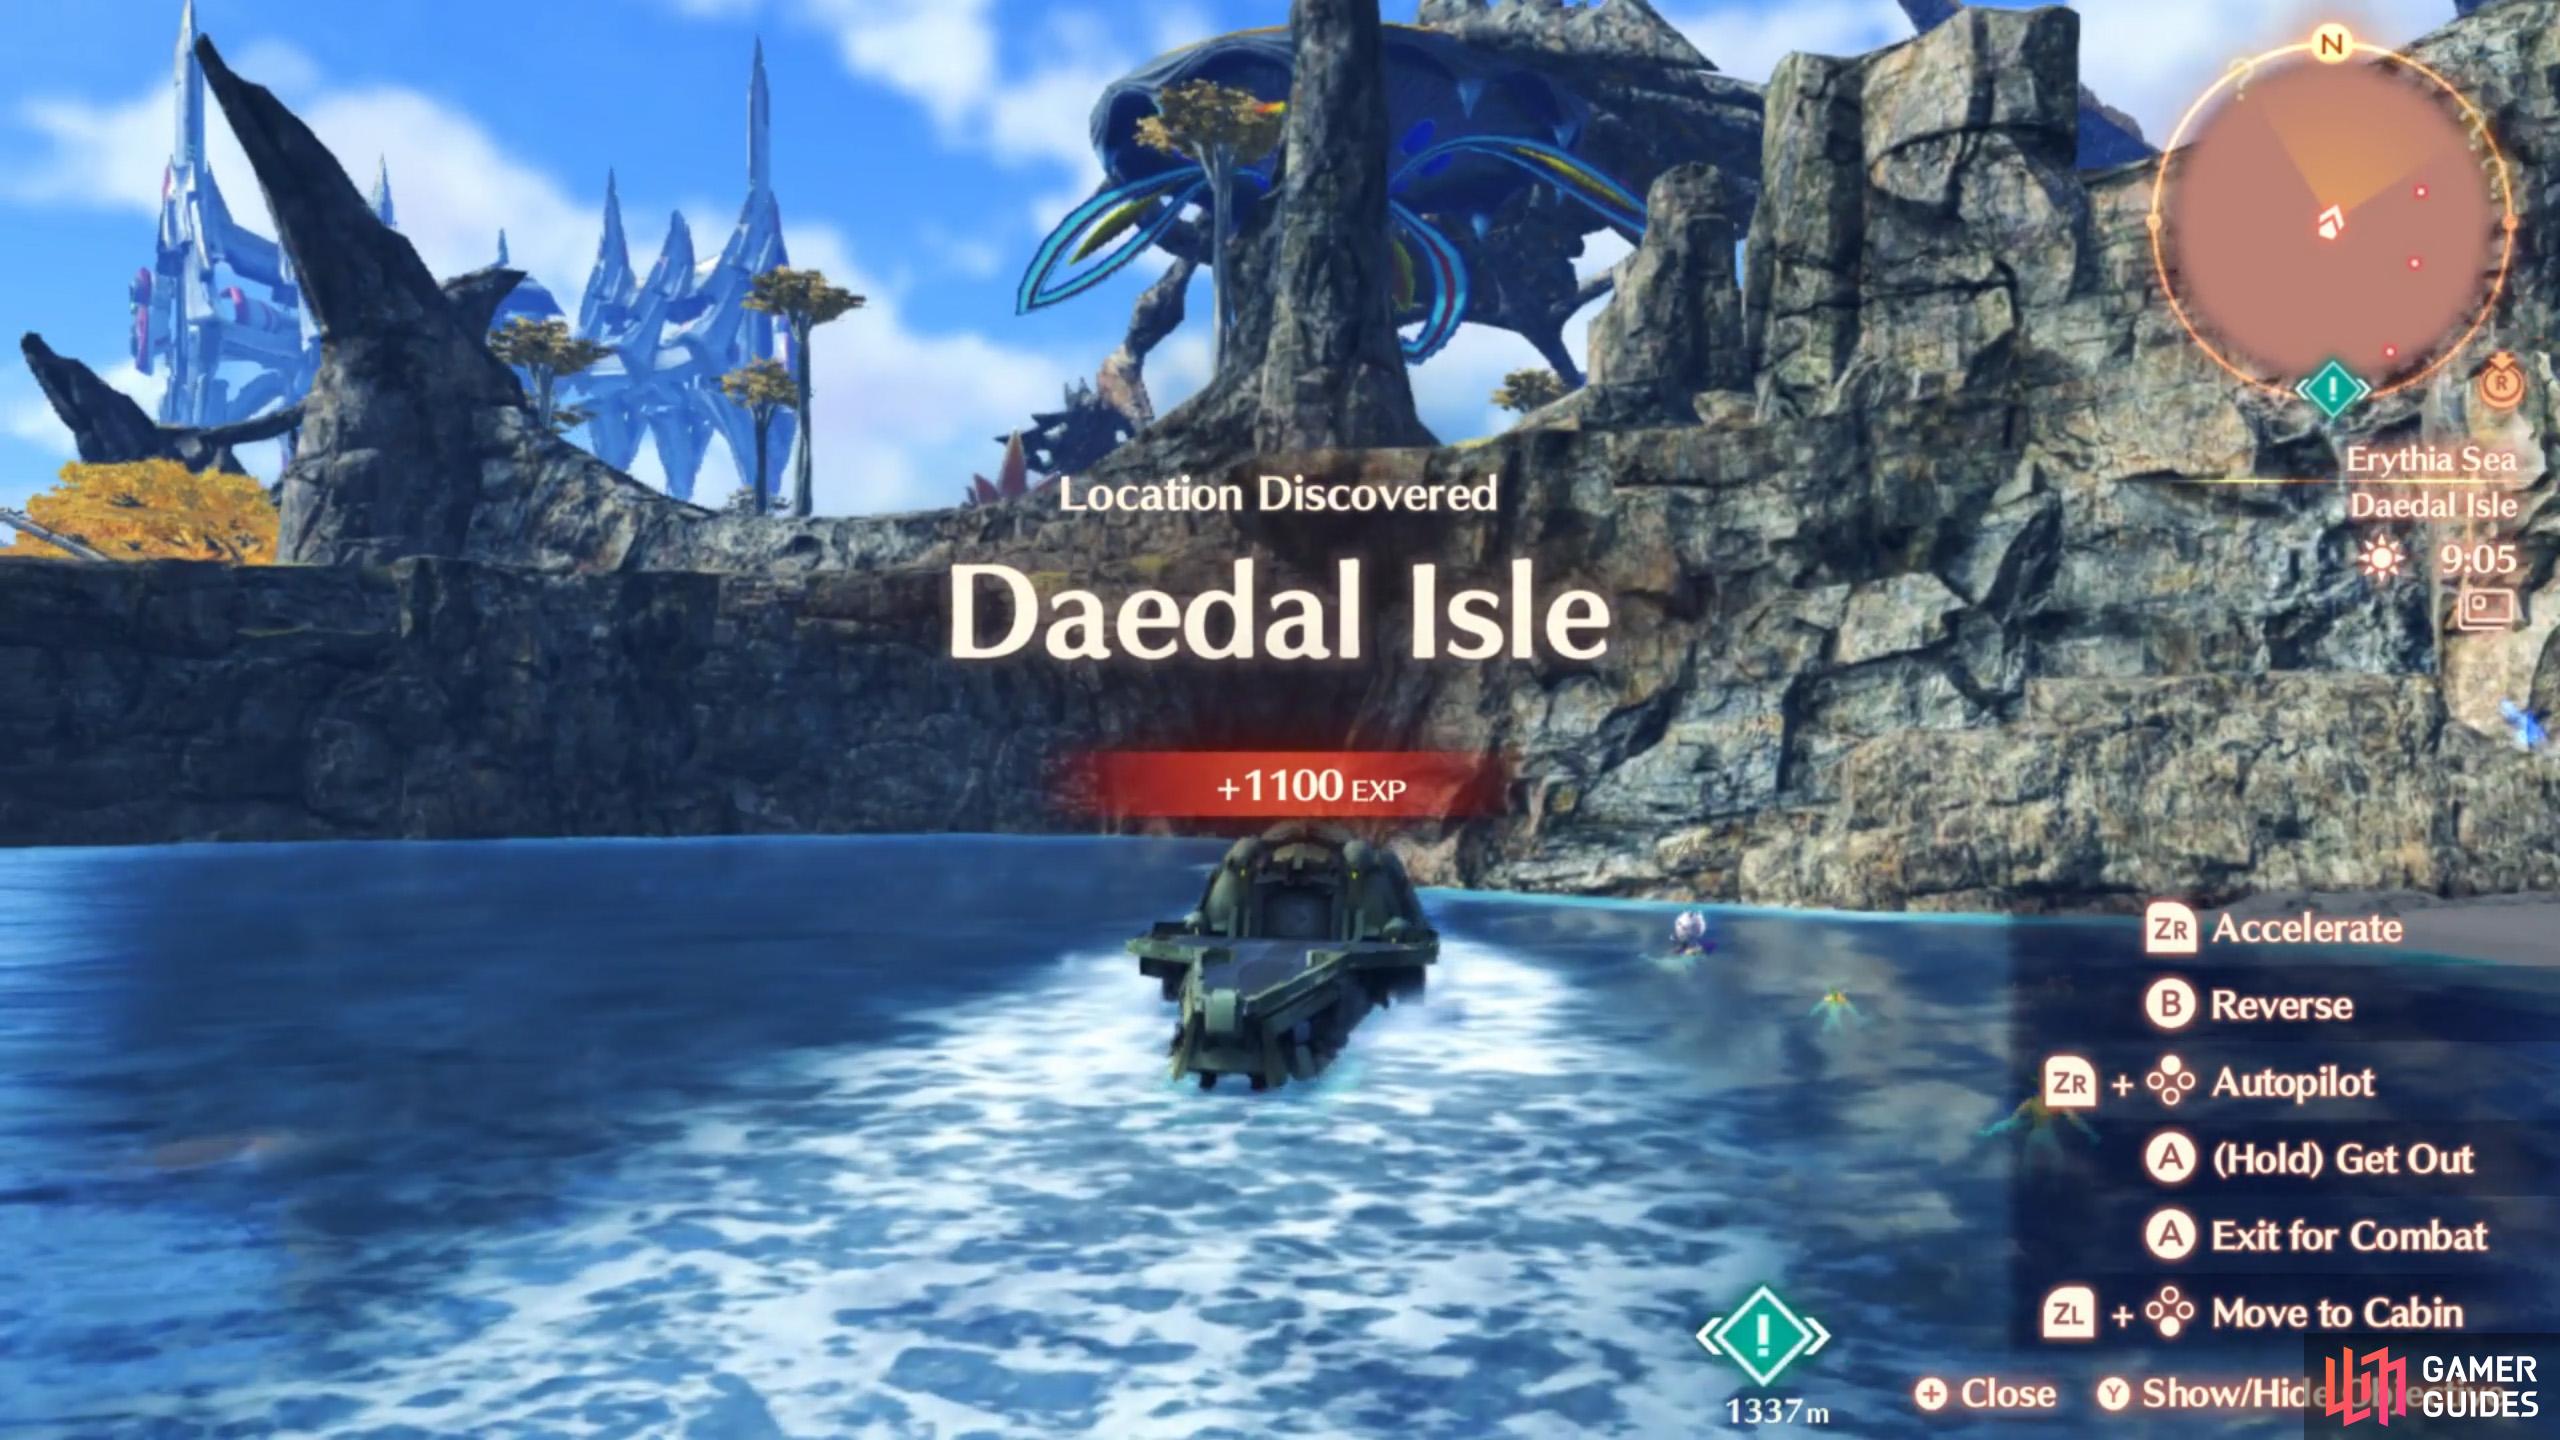 Daedal Isle is home to many massive monsters.